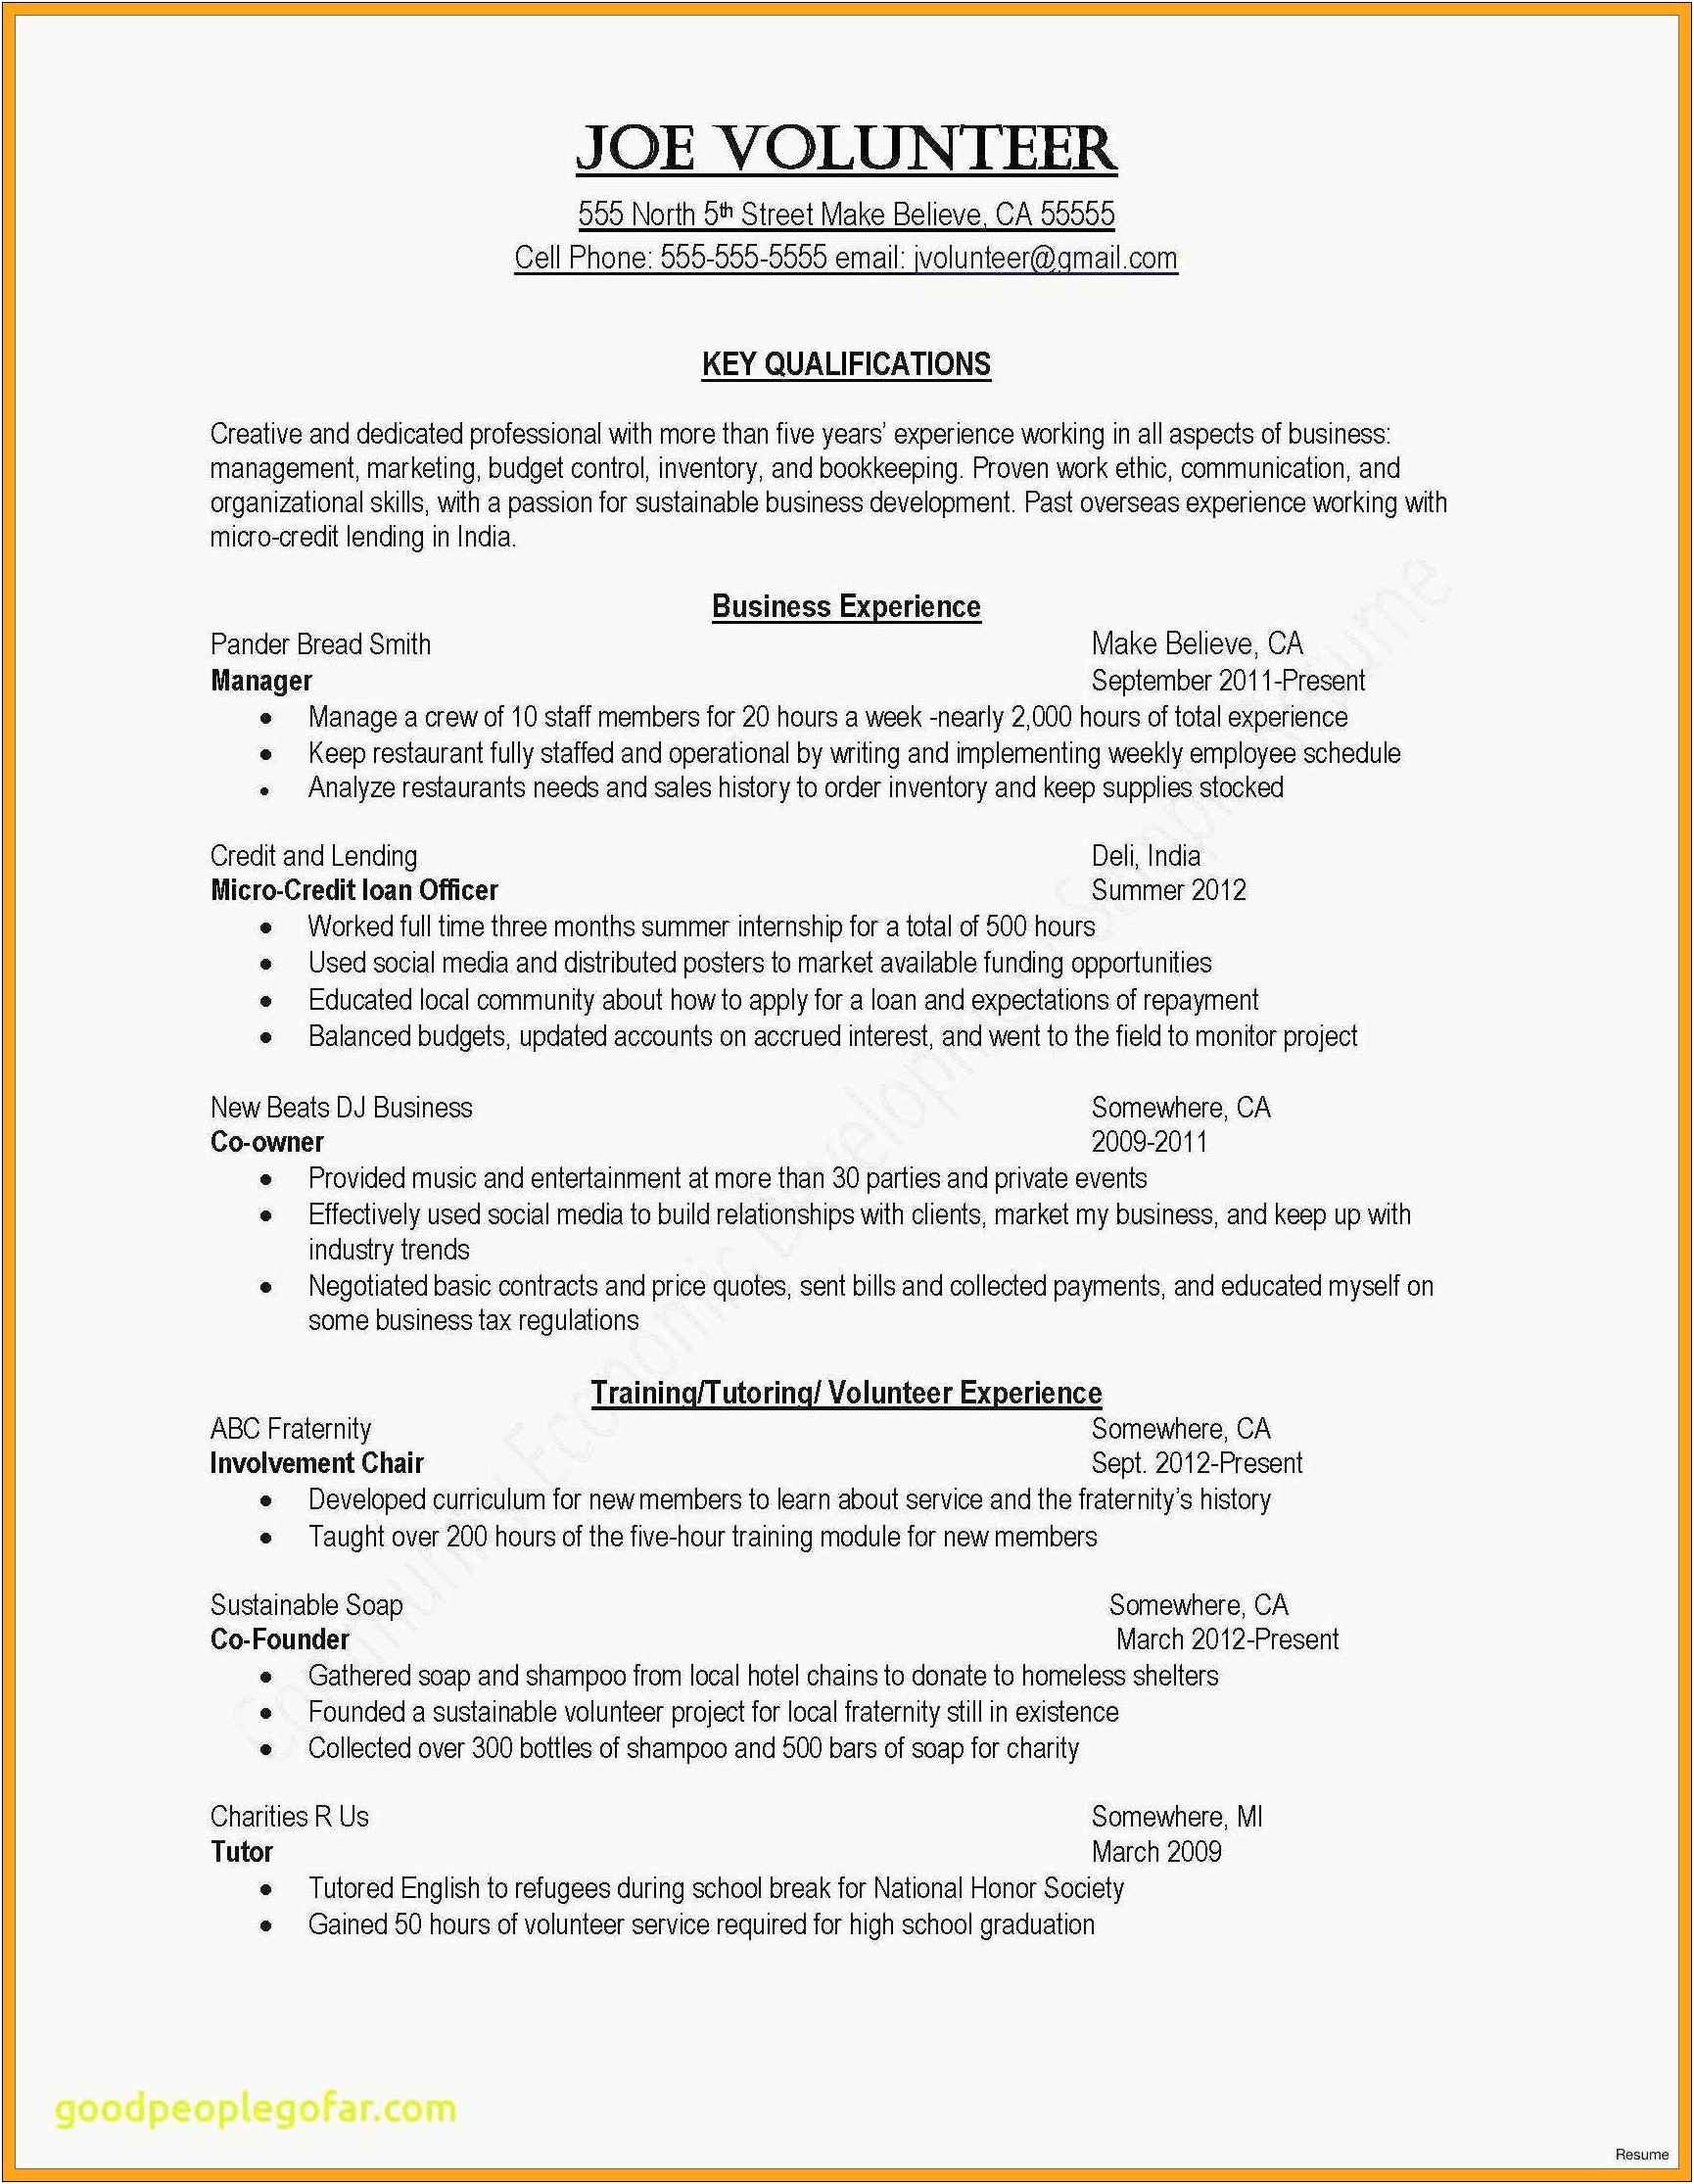 My First Job Resume Examples